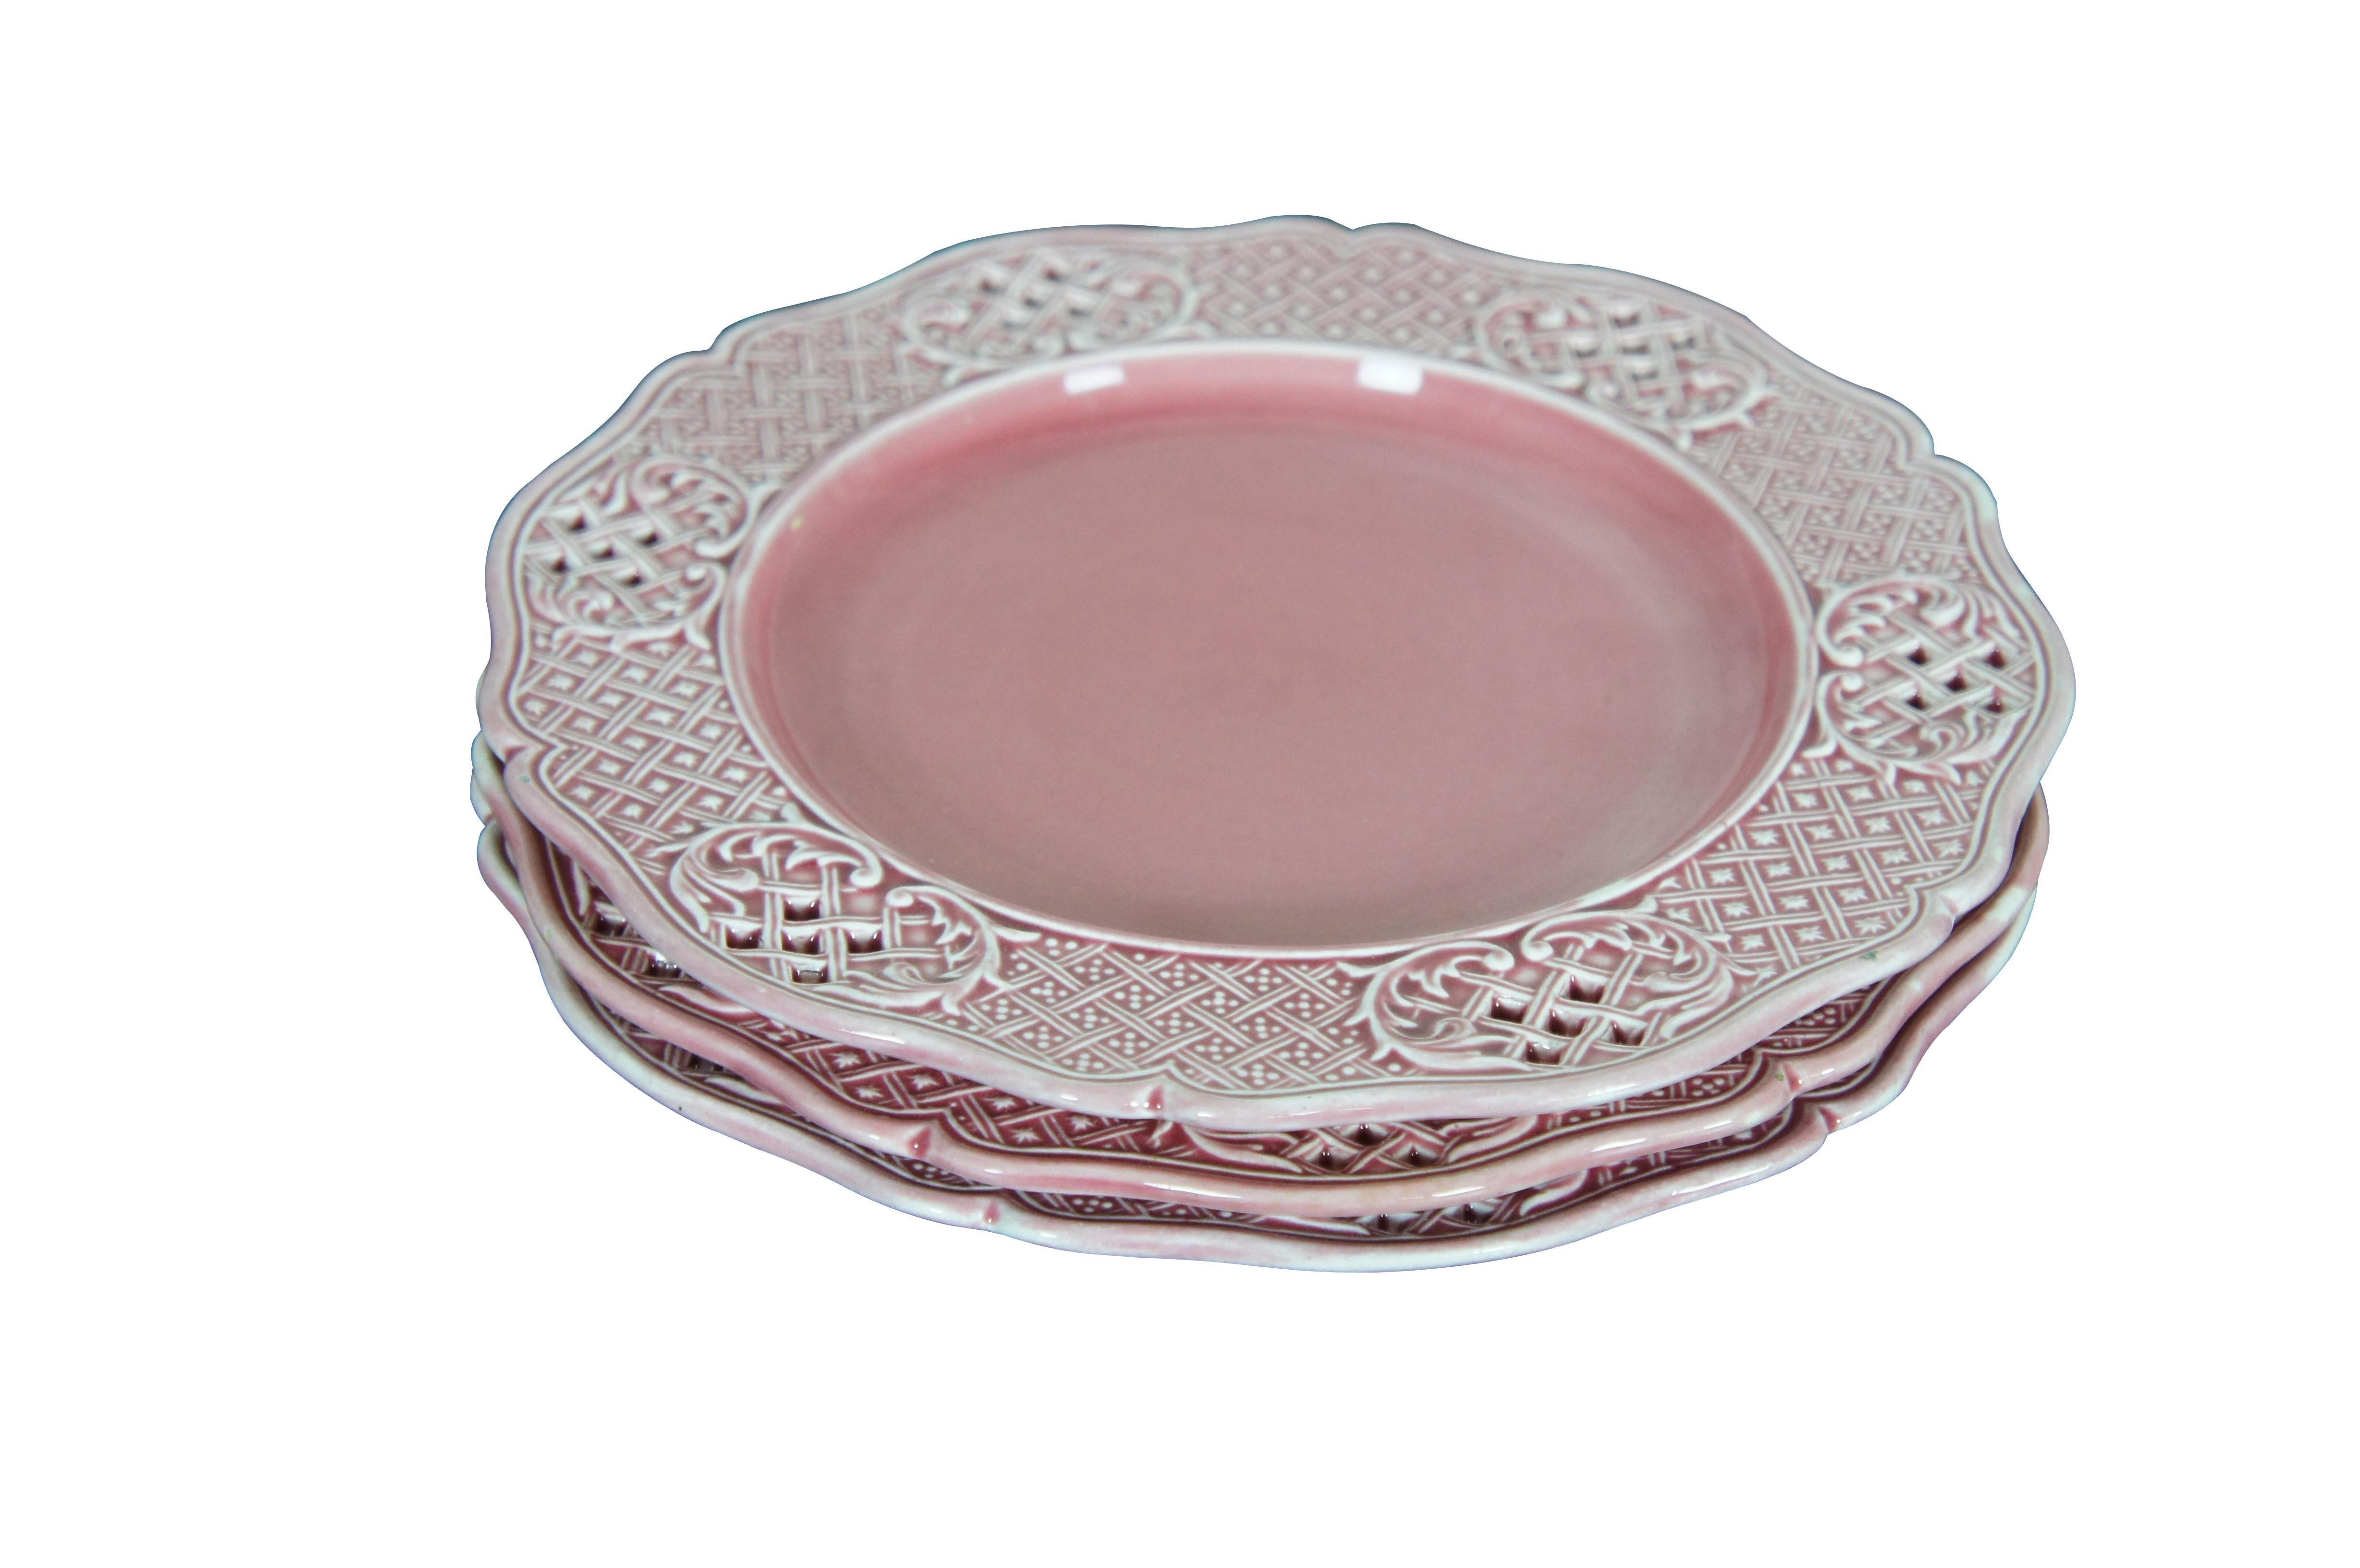 Three antique Austrian / Hungarian pink stoneware plates featuring a scalloped pierced basketweave lattice design.  Marked with Vienna beehive and K Y H. 

Dimensions:
8.5